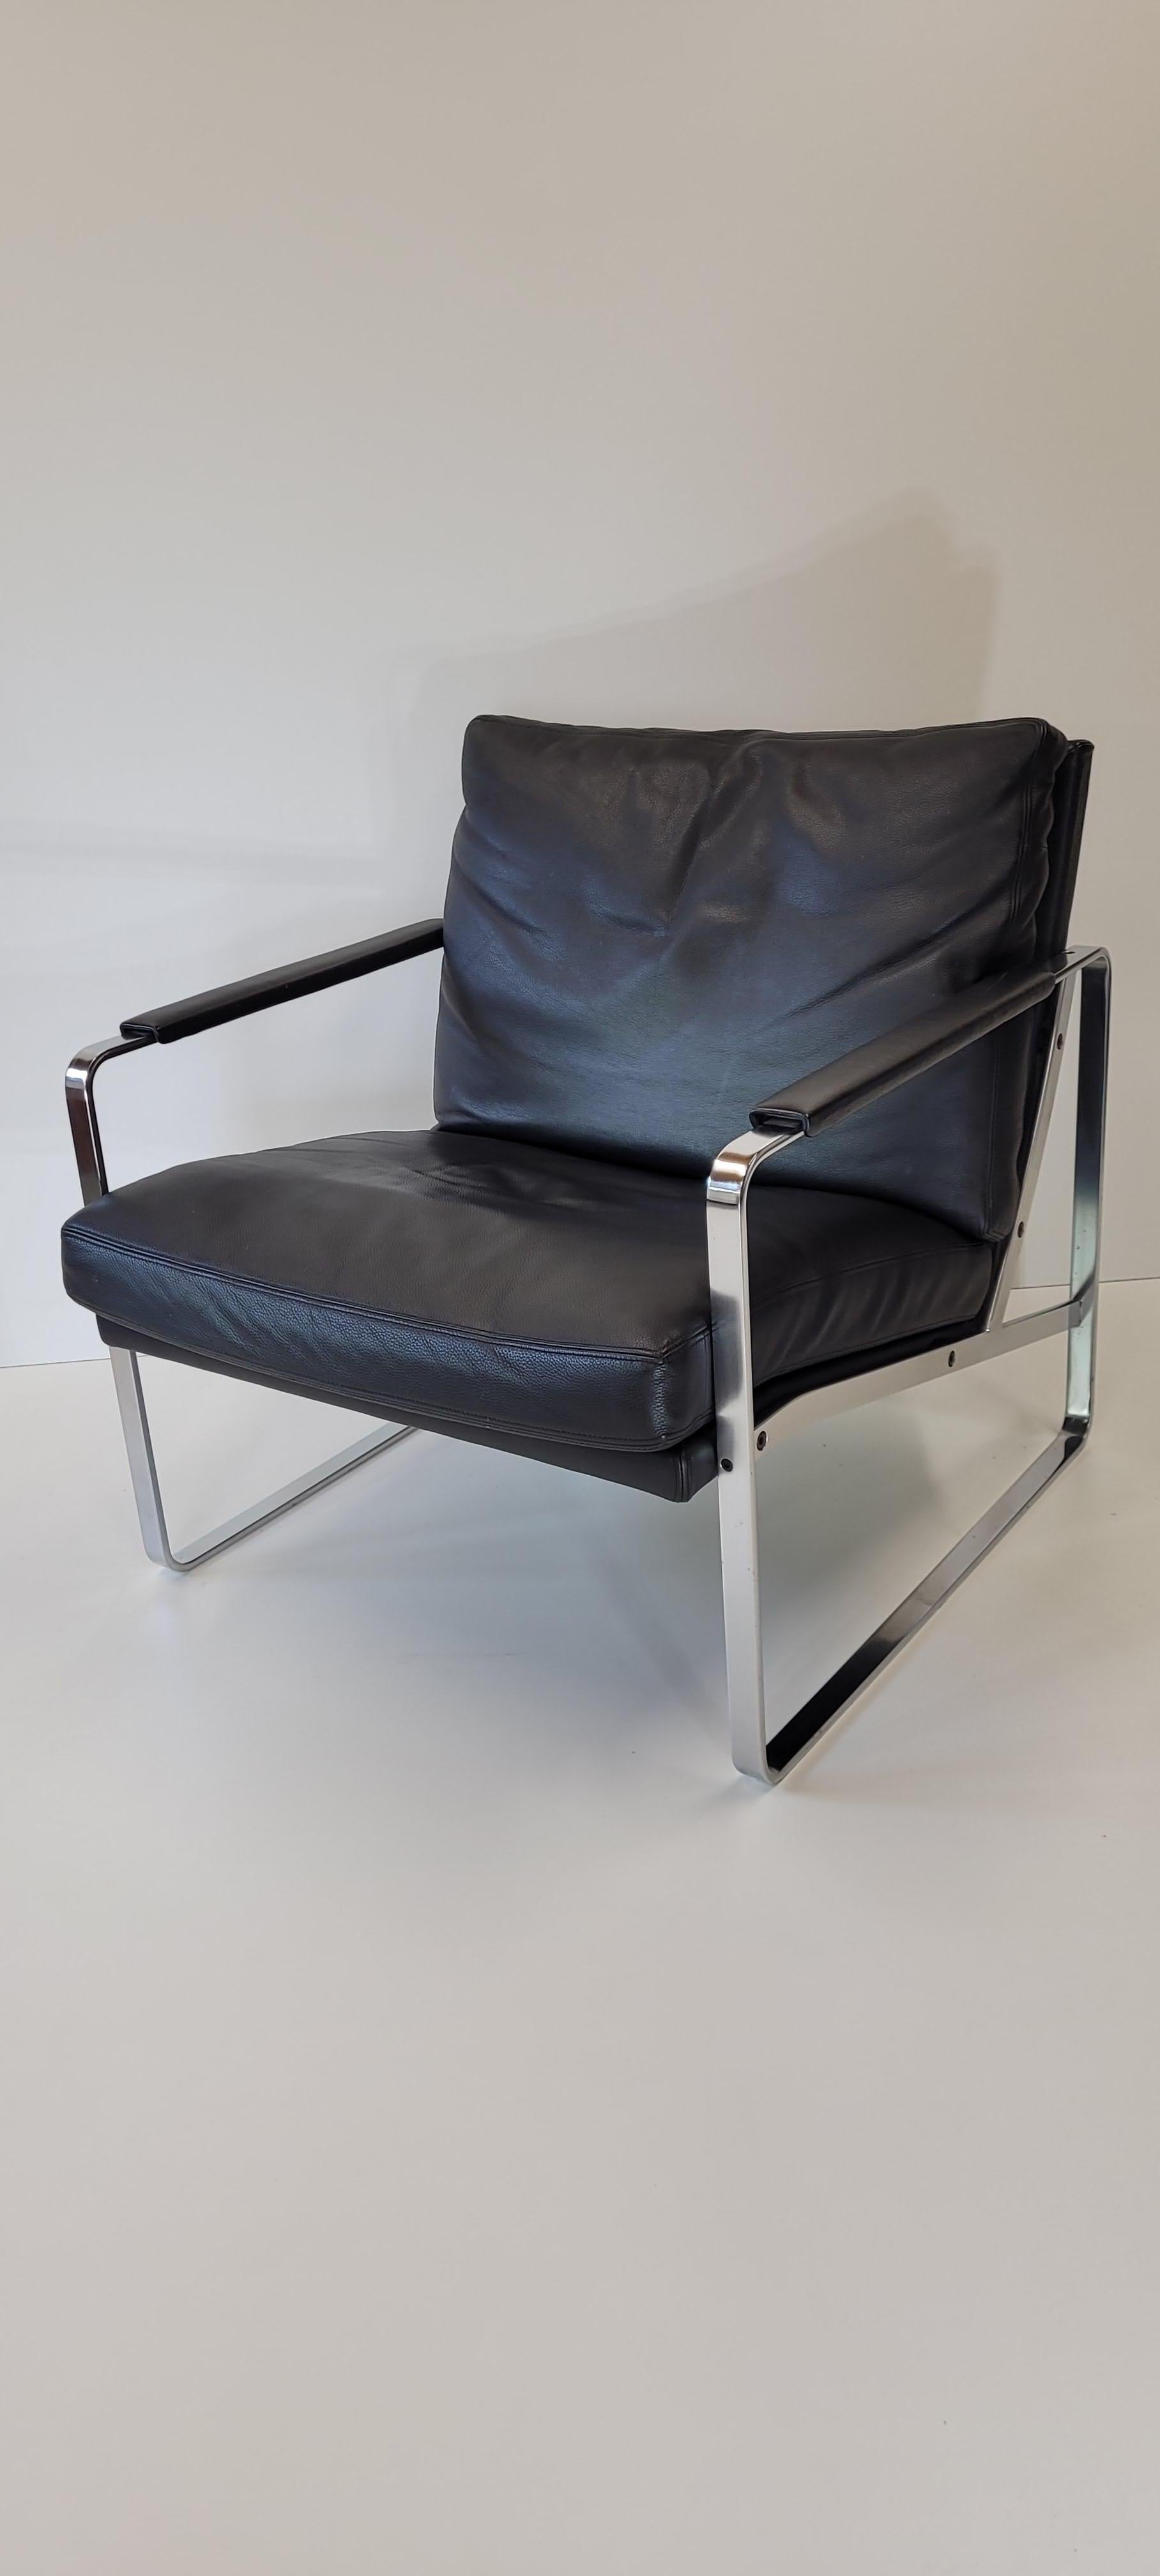 Pair of Armchair in Black Soft Leather Seat and Stainless Steel Frame, Fabricius For Sale 1